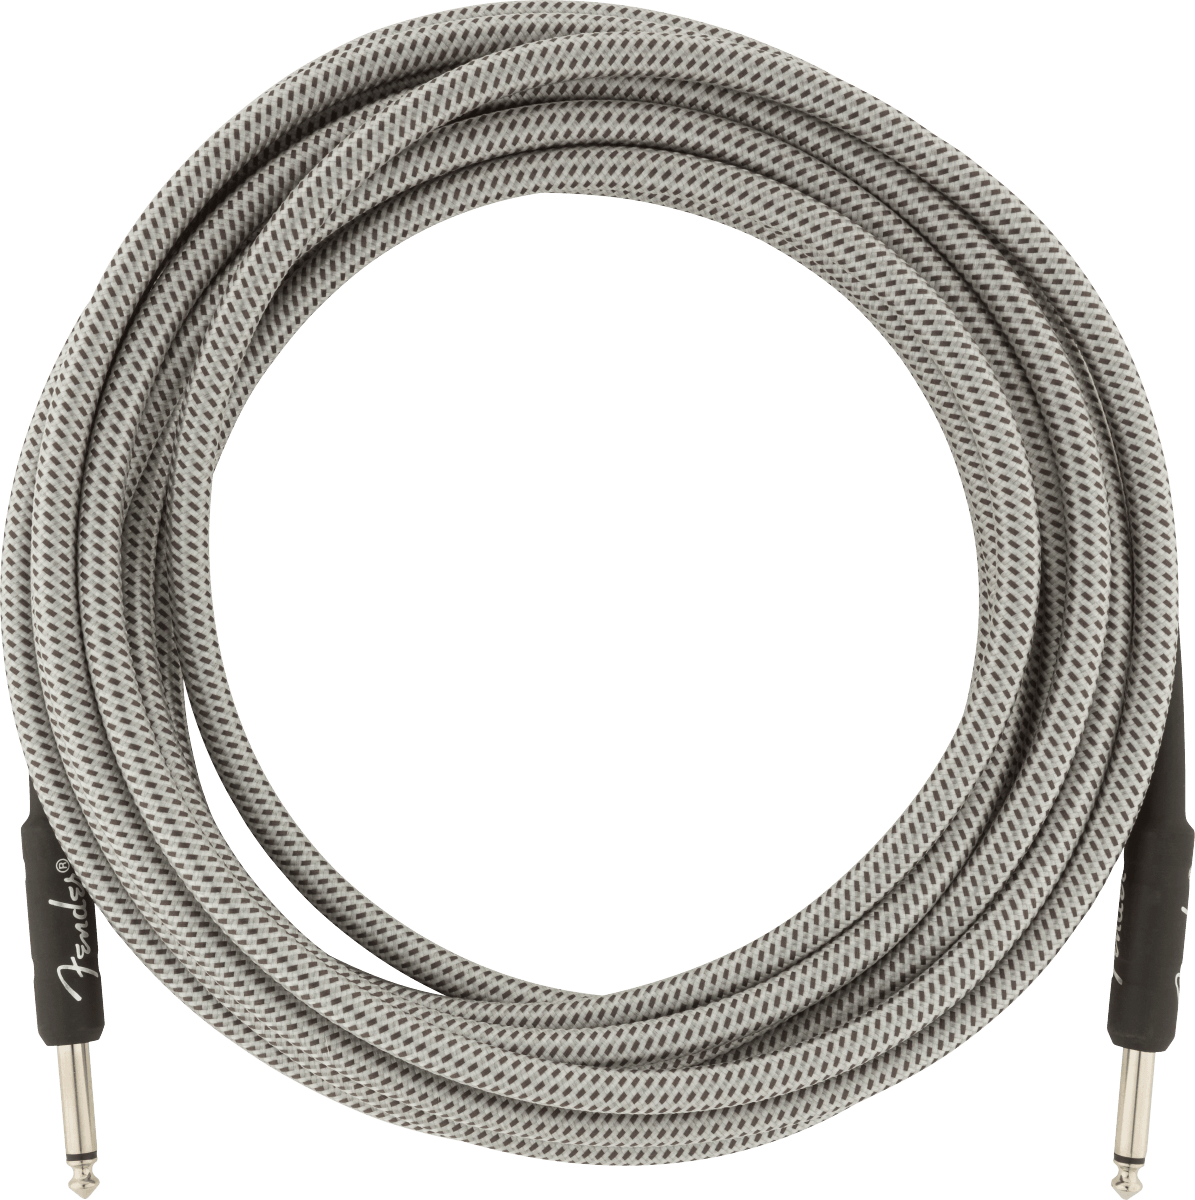 Professional Series Instrument Cable 18.6 White Tweed - Muso's Stuff